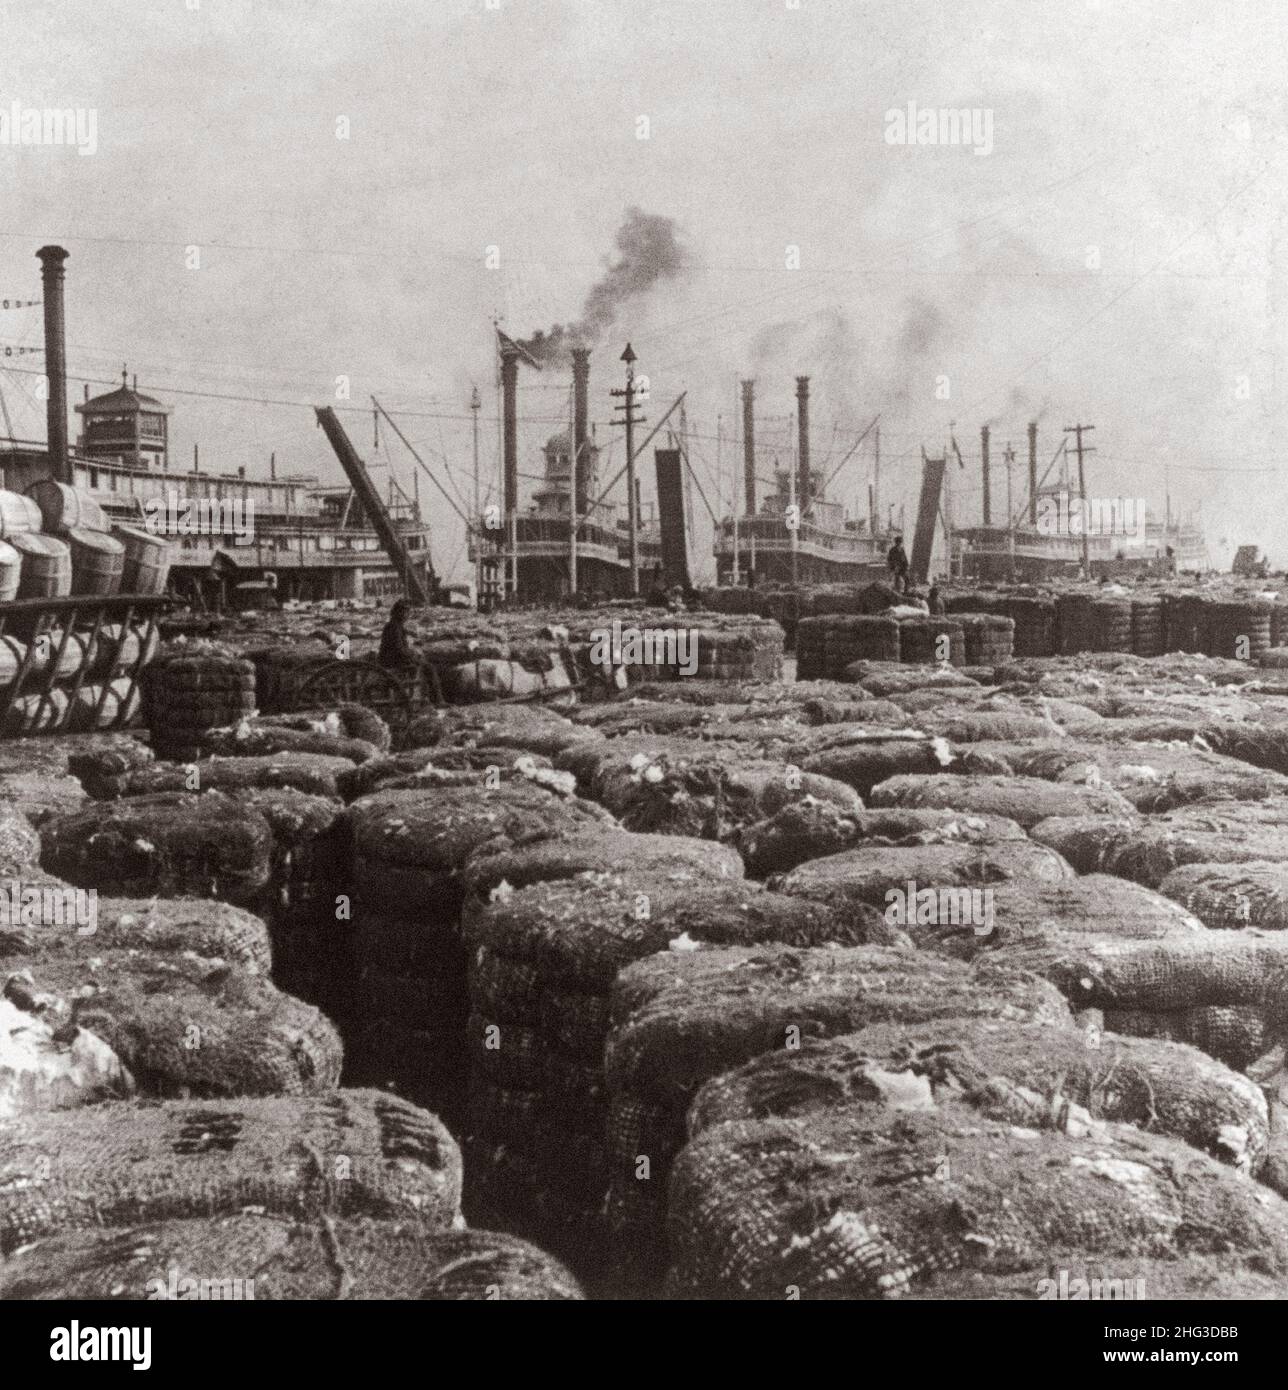 Vintage photo of the cotton levee, New Orleans, La. USA. 1901 Photo is showing thousands of bales of cotton and four docked steamers. Stock Photo